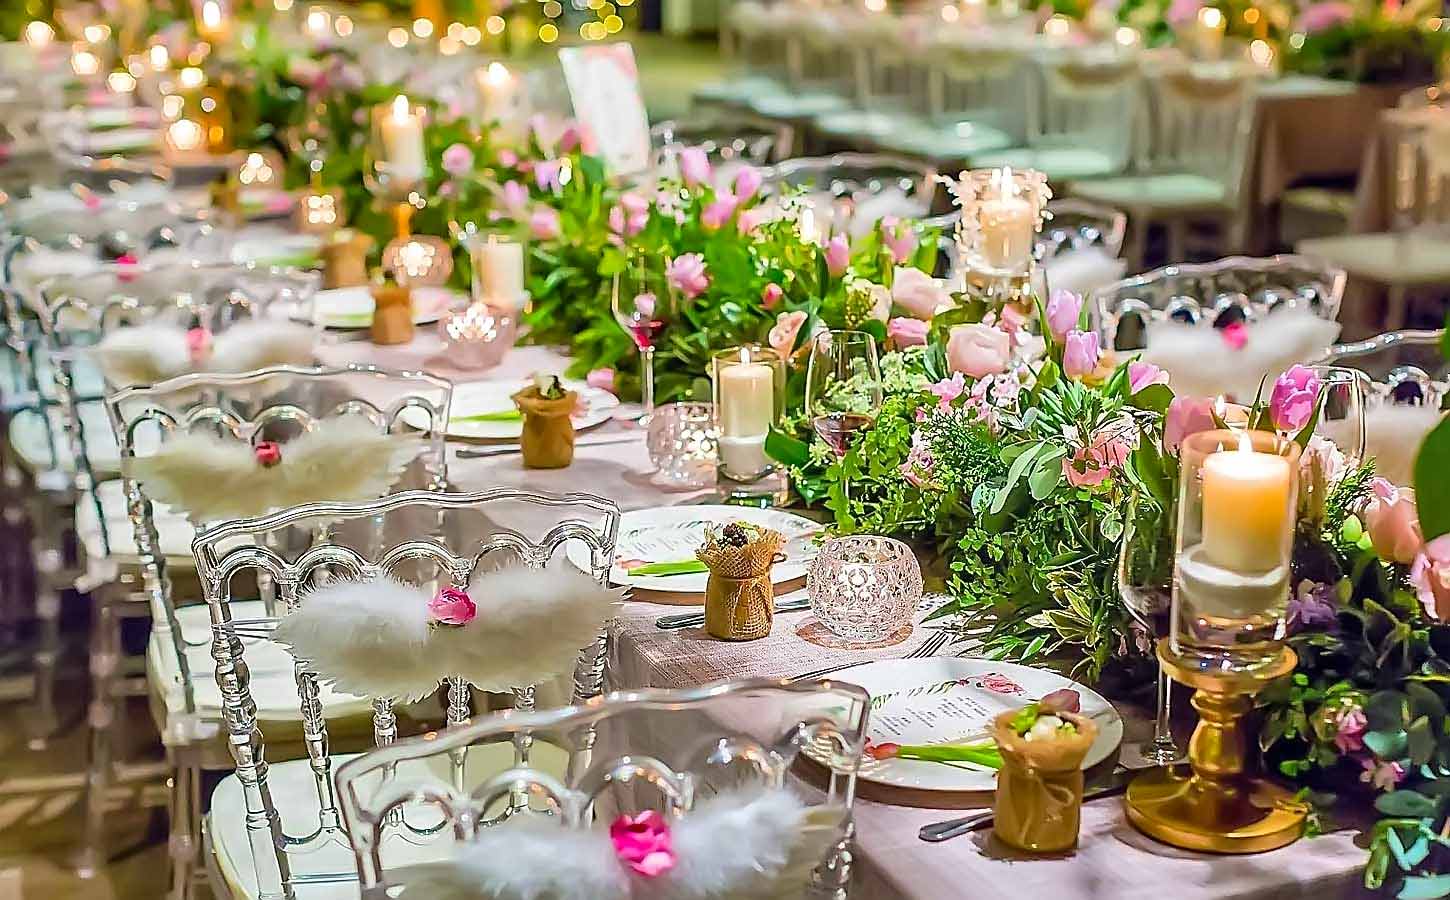 Wedding table decoration with bright and vivid colors